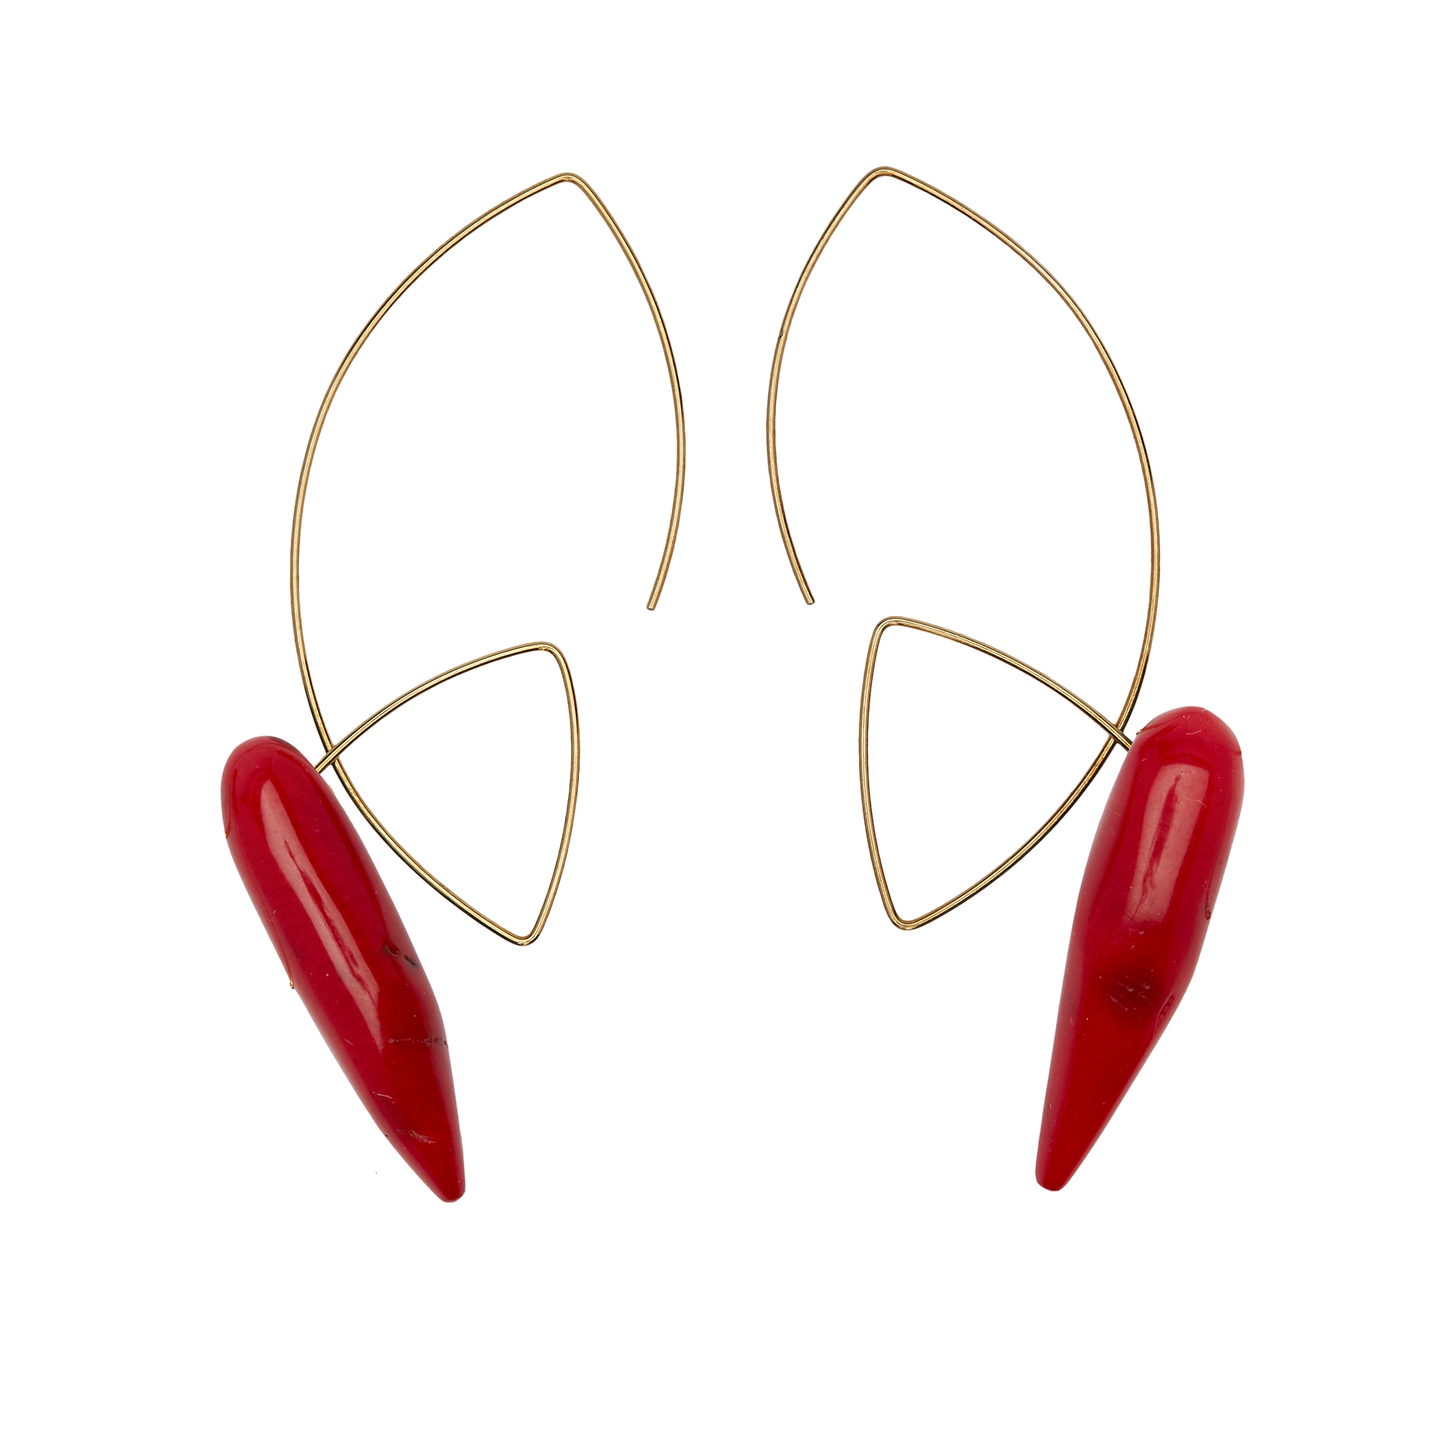 Large Angled Loop Earrings with Gemstones/Bamboo Coral (sustainably produced)